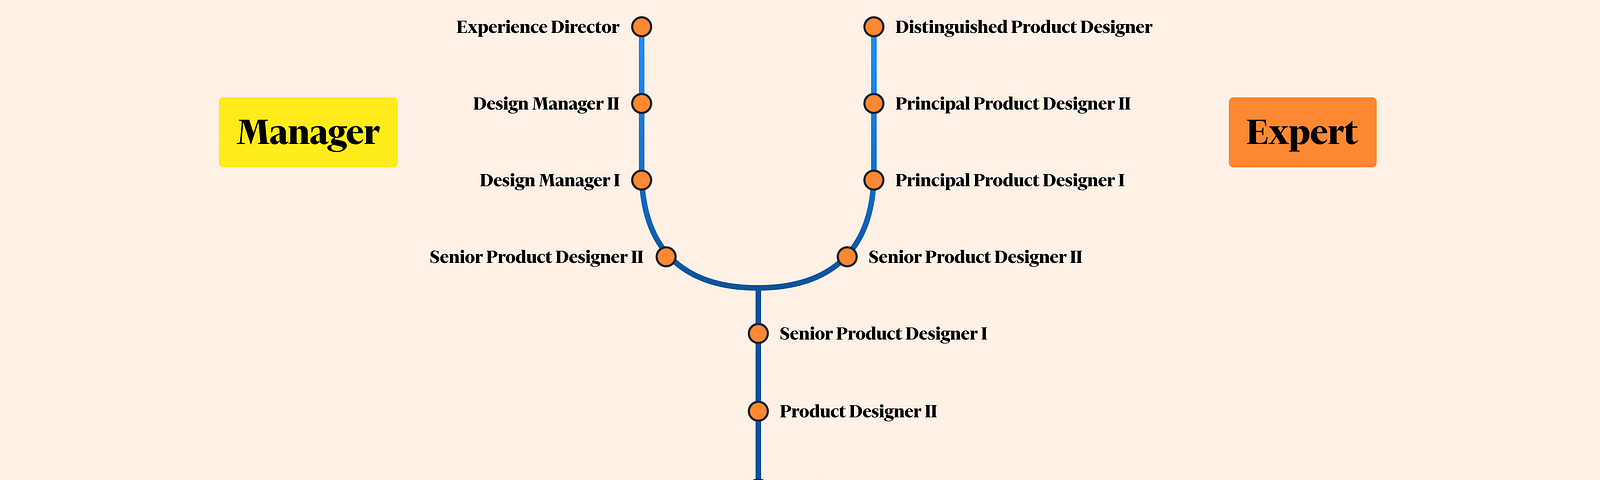 The image describes the two different tracks. The levels are: Junior Product Designer I, Junior Product Designer II, Product Designer I, Product Designer II, Senior Product Designer I. Then it splits in 2, the Manager track continues like this: Senior Product Designer II, Design Manager I, Design Manager II, Experience Director. The IC track continues like this: Senior Product Designer II, Principal Product Designer I, Principal Product Designer II, Distinguished Product Designer.